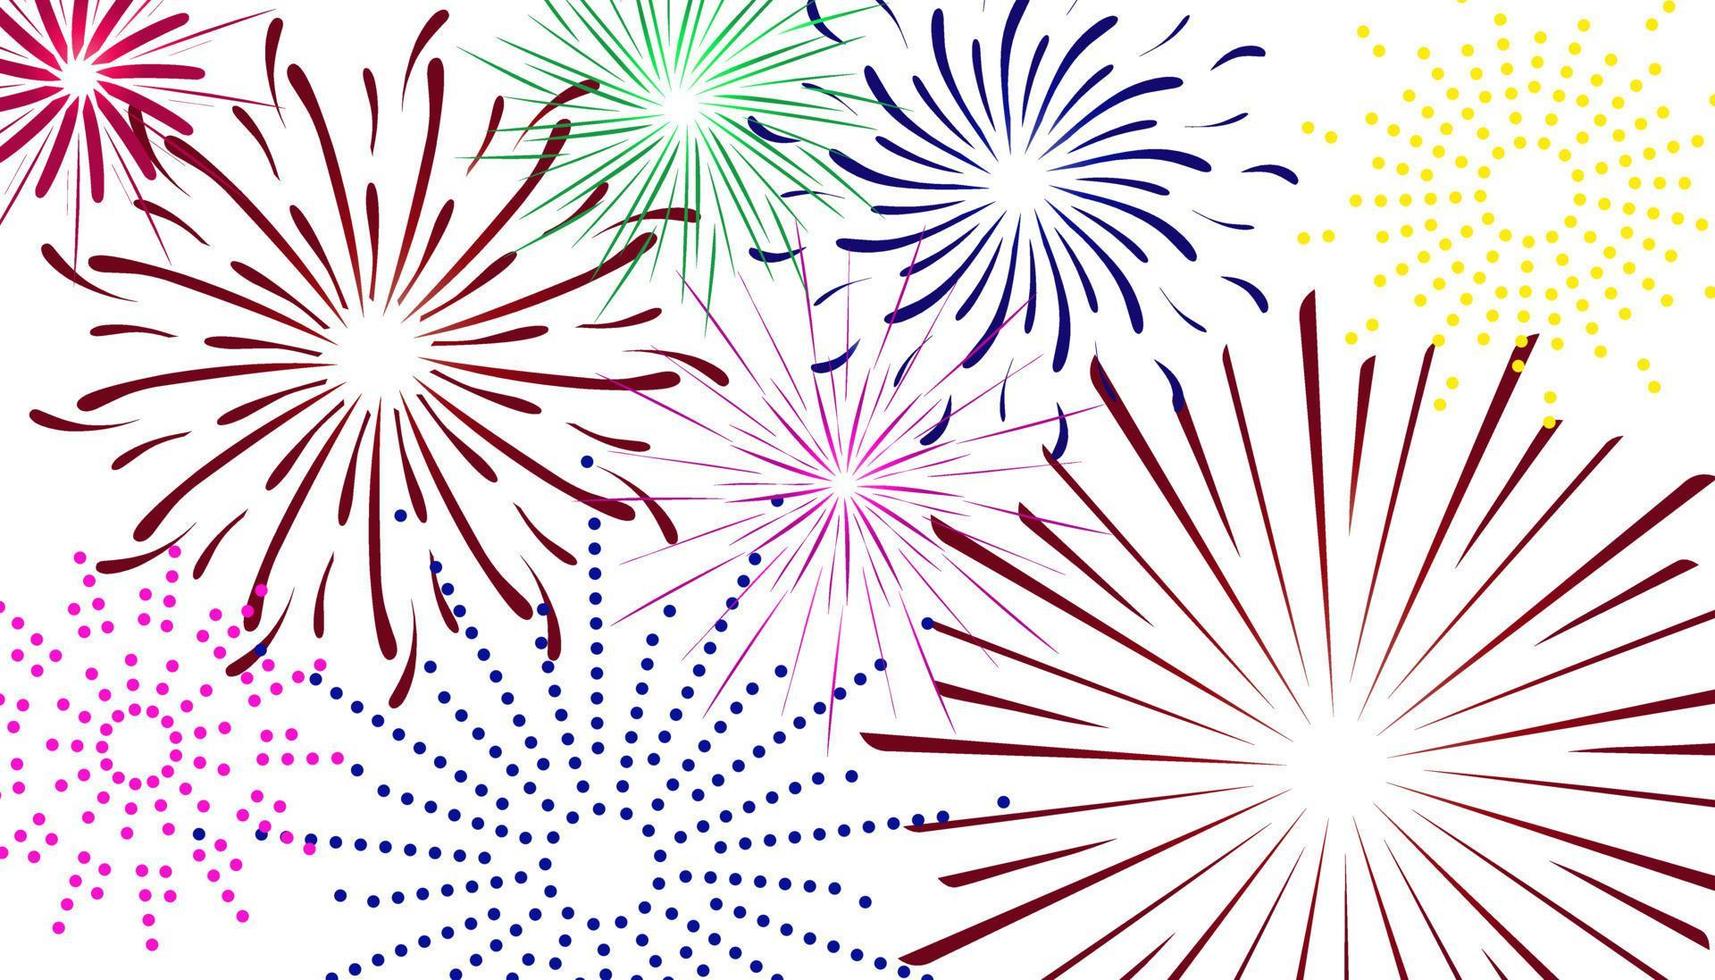 The background design with a colorful fireworks pattern is suitable for banners, posters, and so on vector